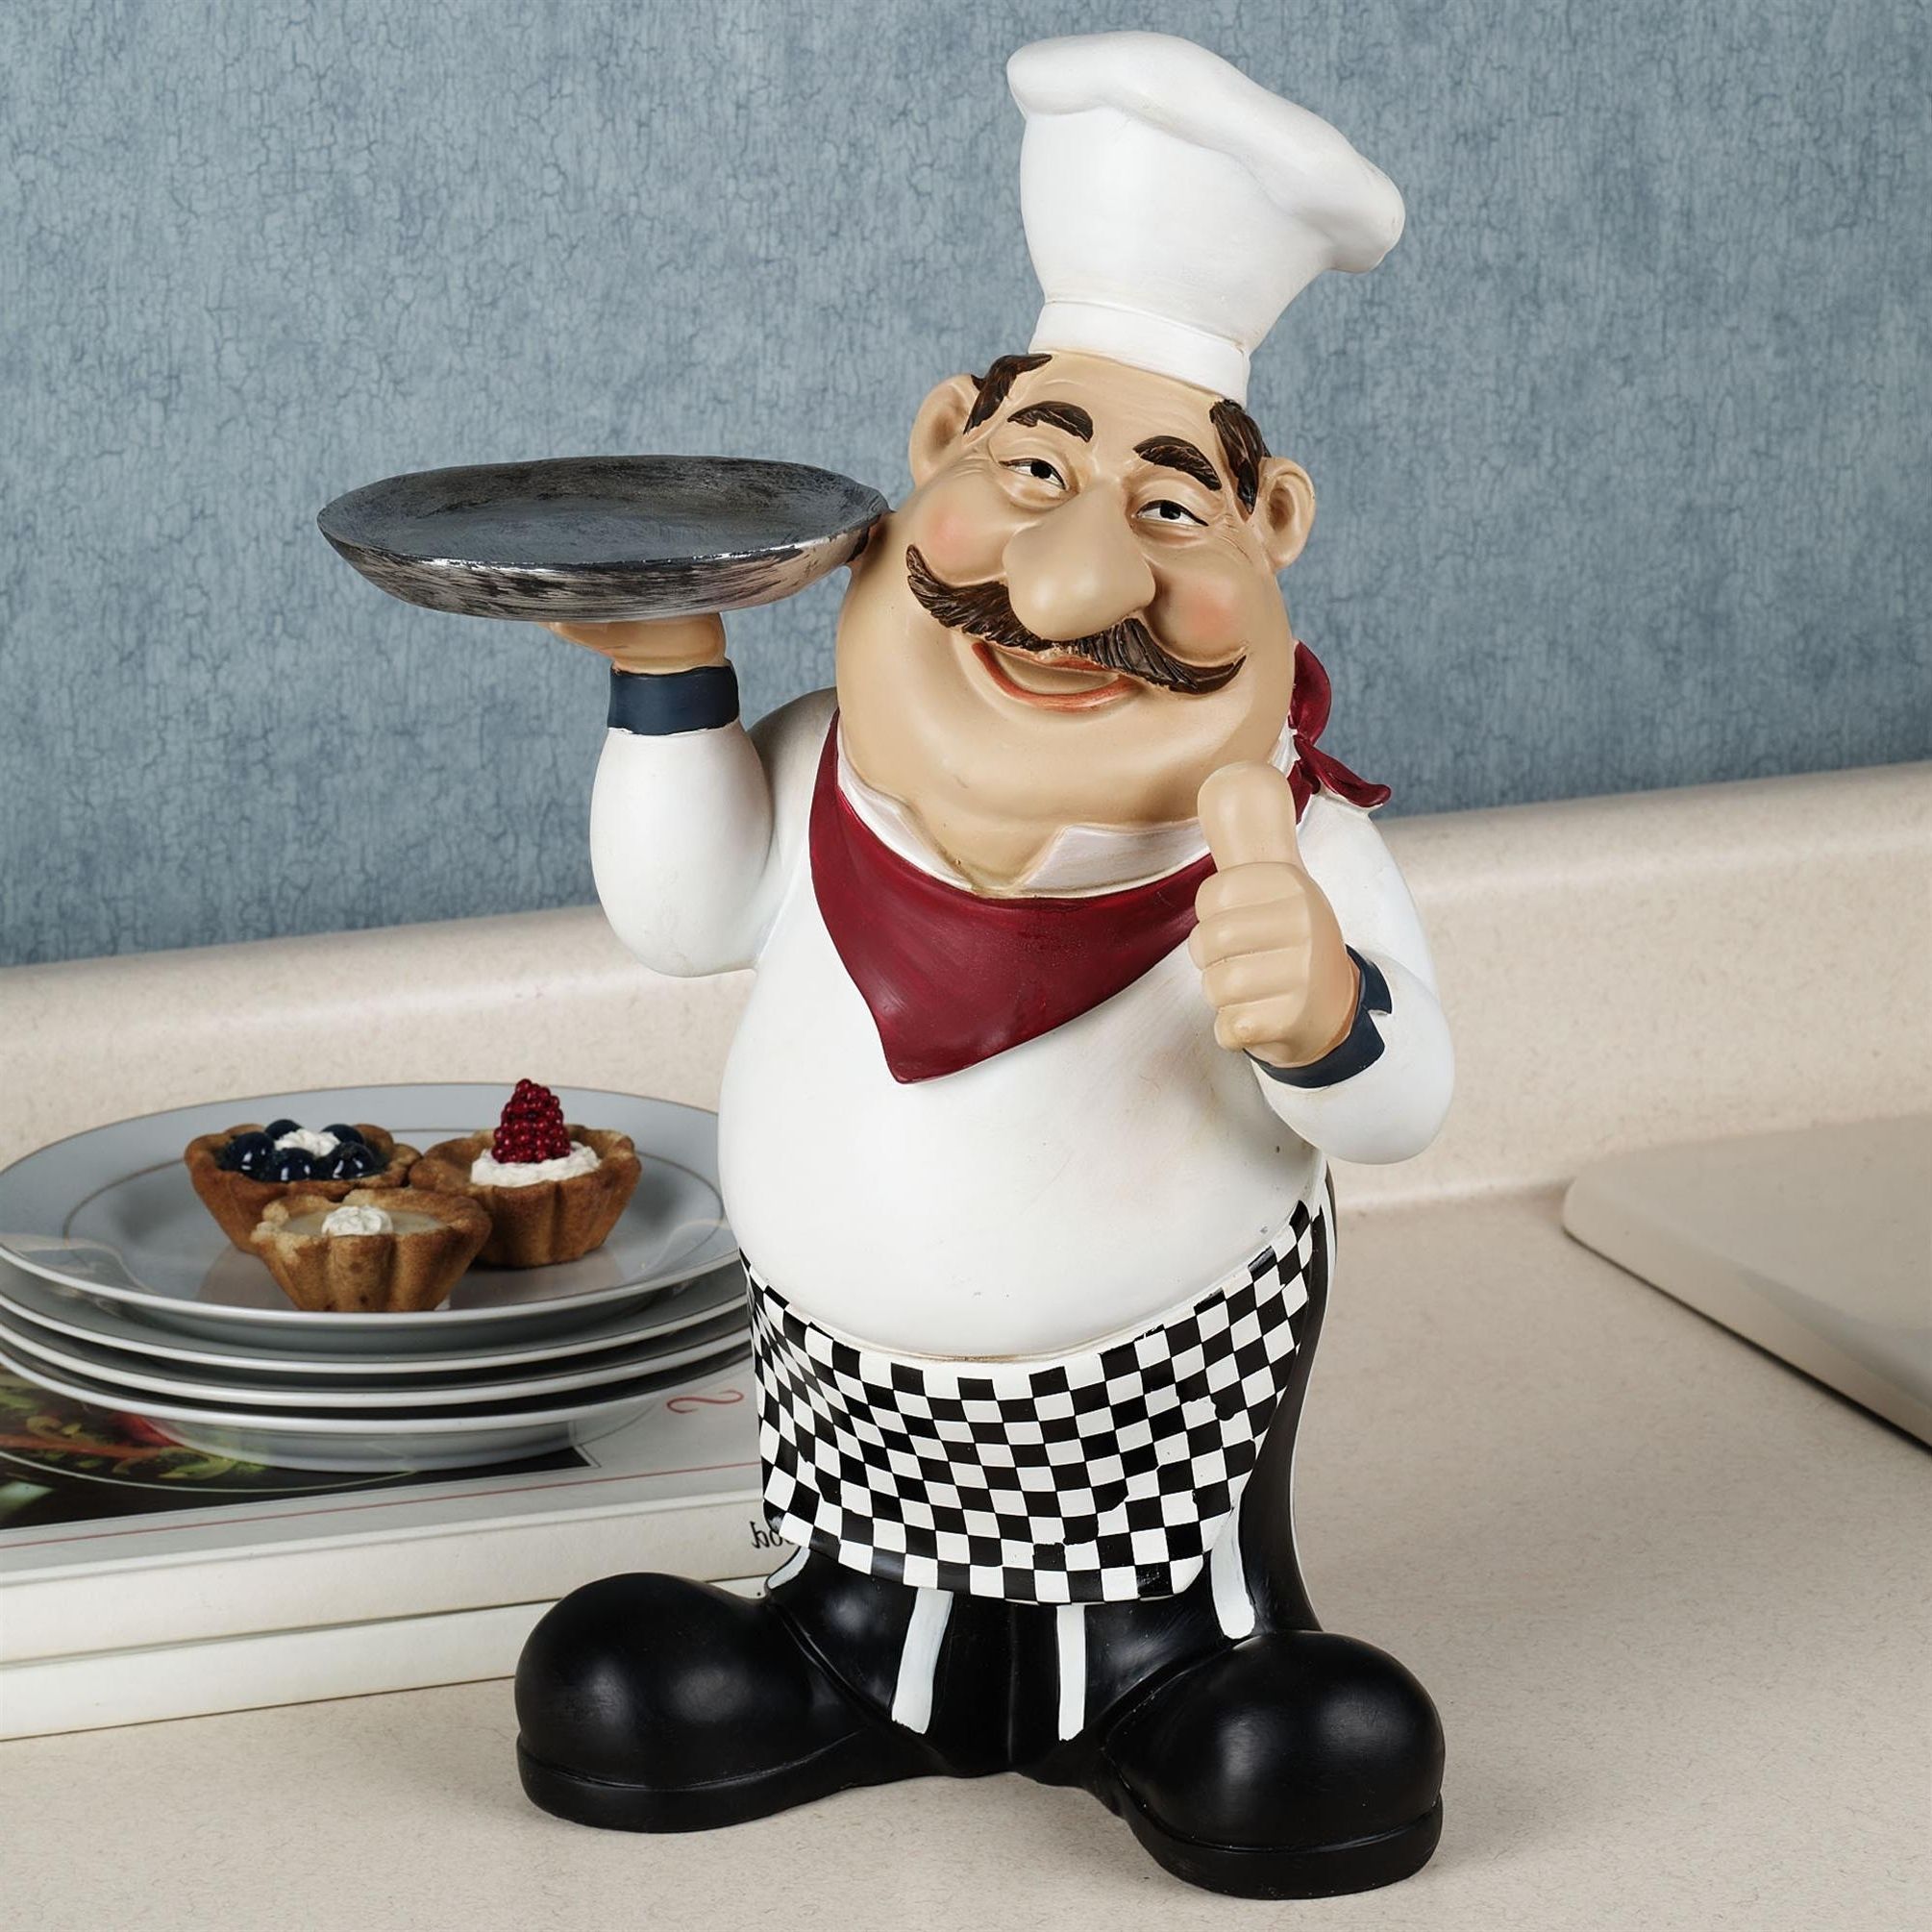 Most Recently Released Italian Chef Wall Art With Regard To Nice And Cute Touch With Fat Chef Kitchen Decor (View 15 of 15)